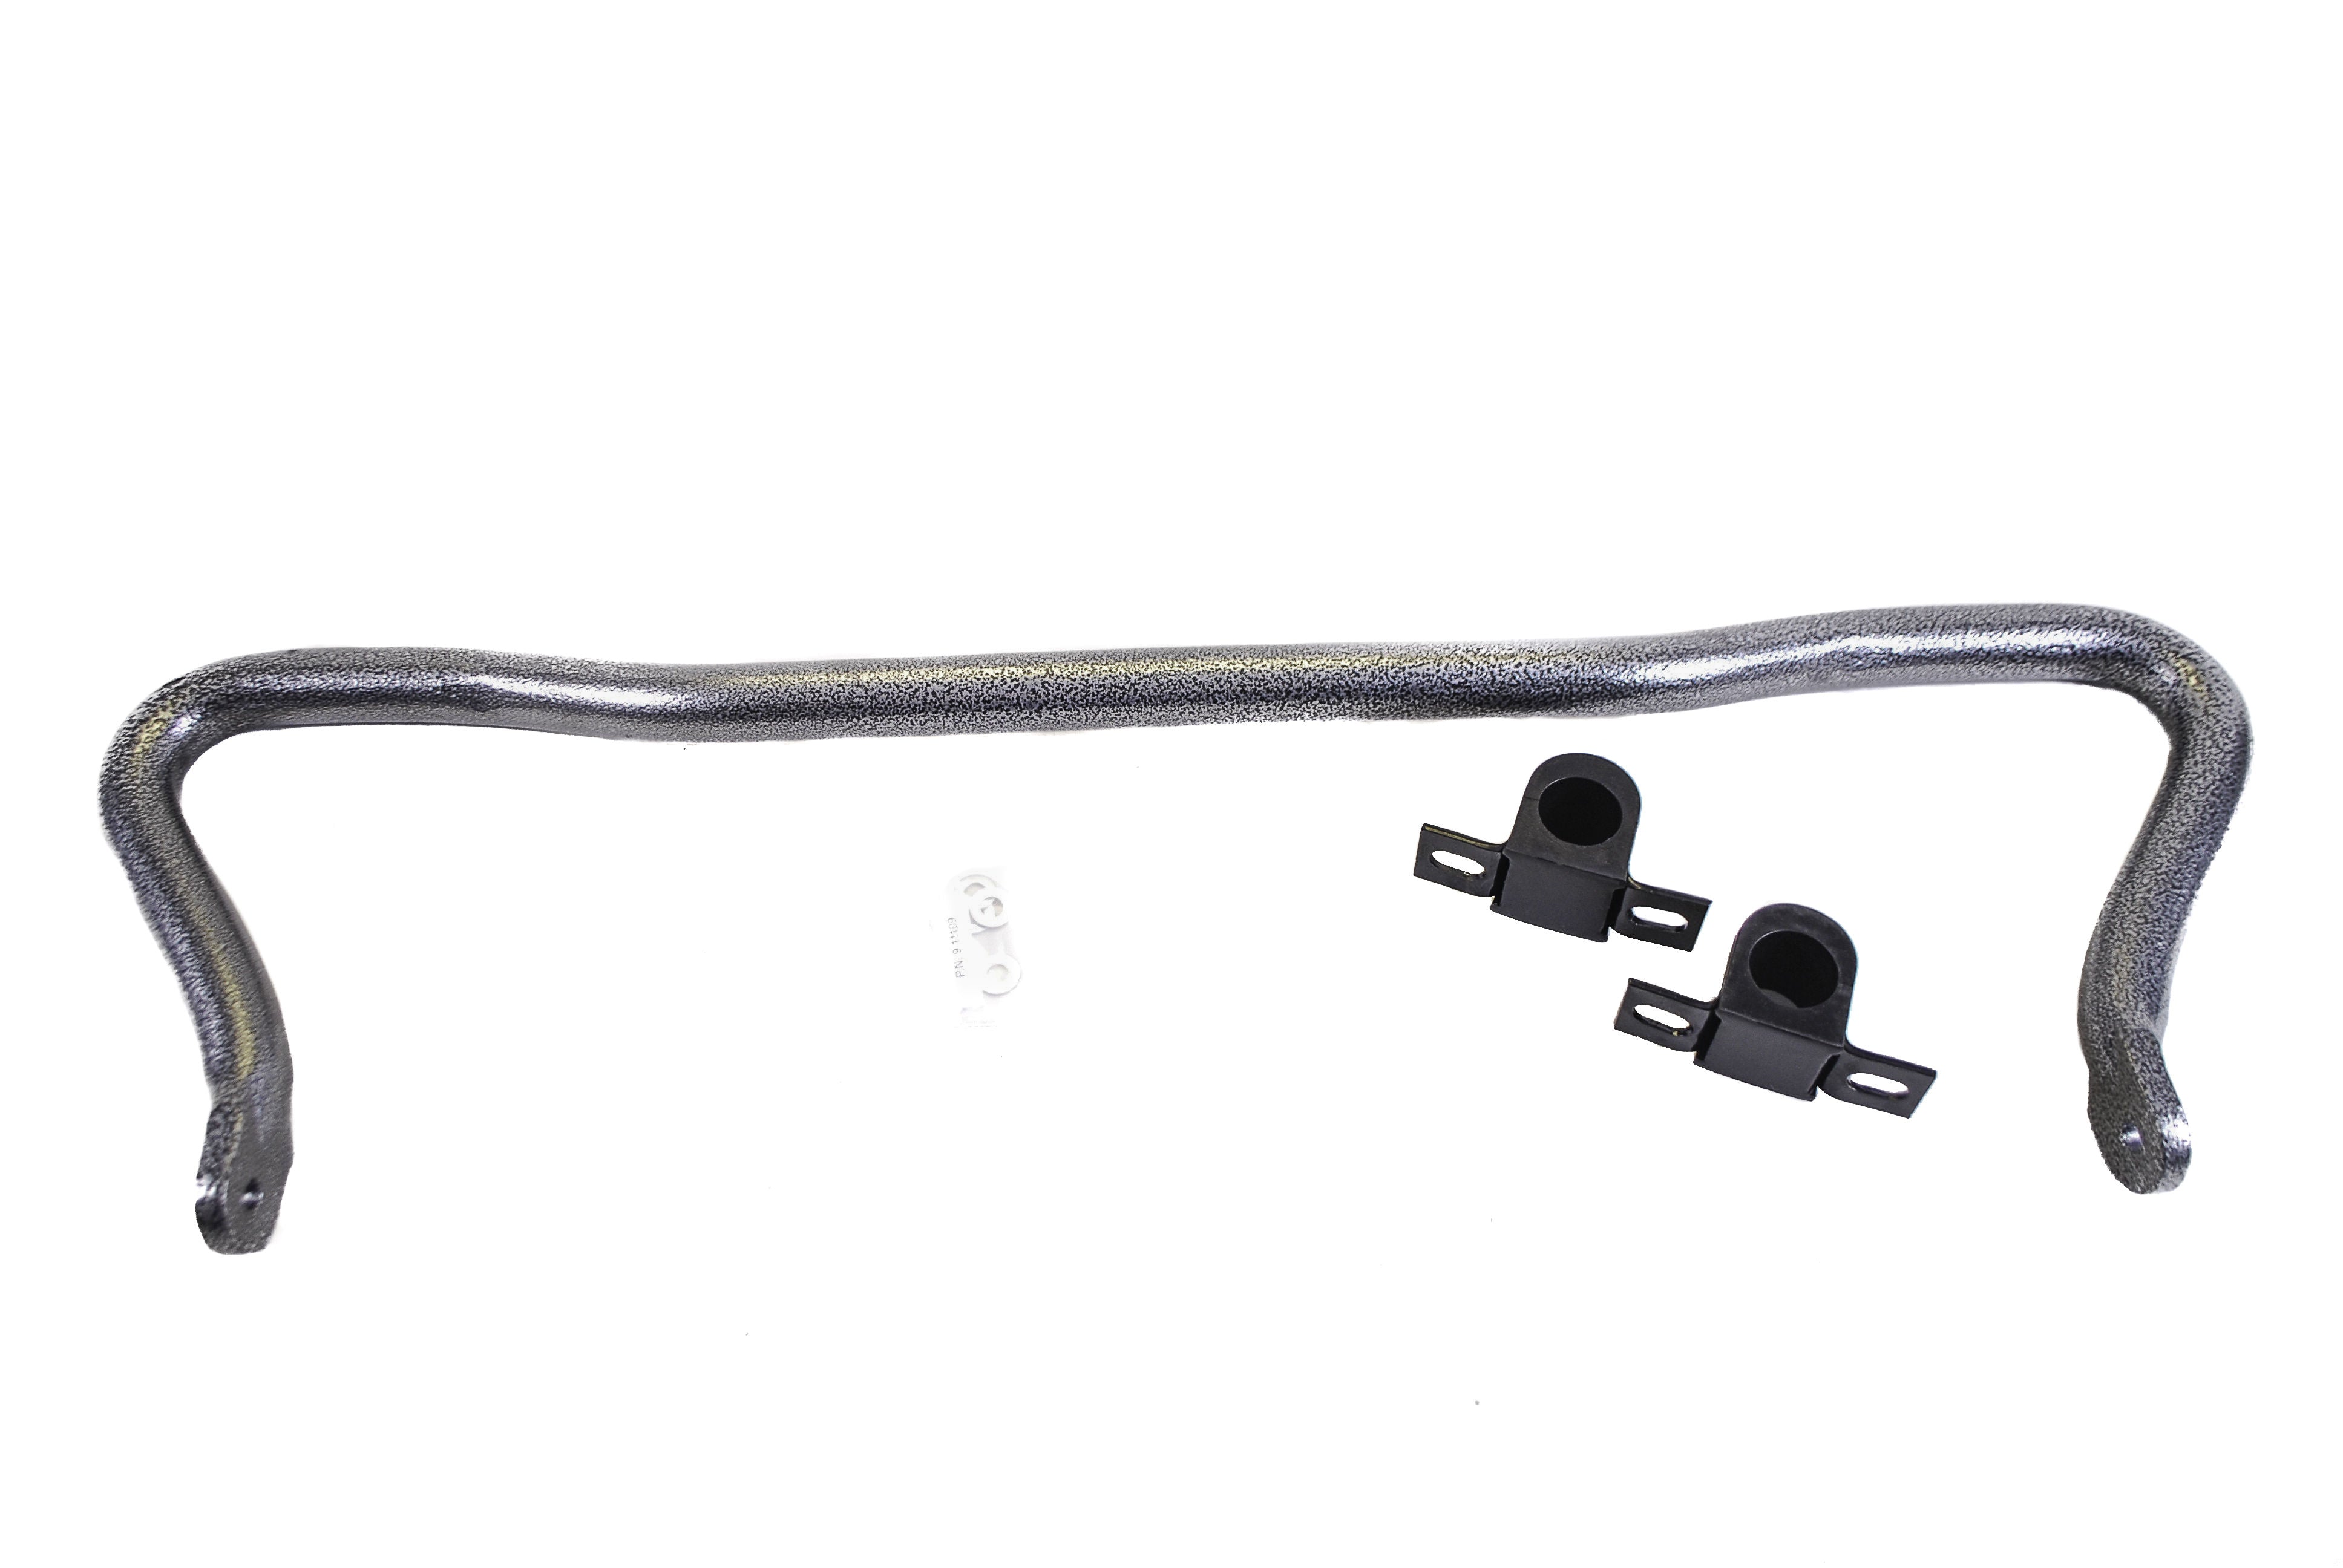 Hellwig 7640 - Front Sway Bar Kit for Ford F-250/F-350 Super Duty 4WD Stock Height to 6" lift 99-04